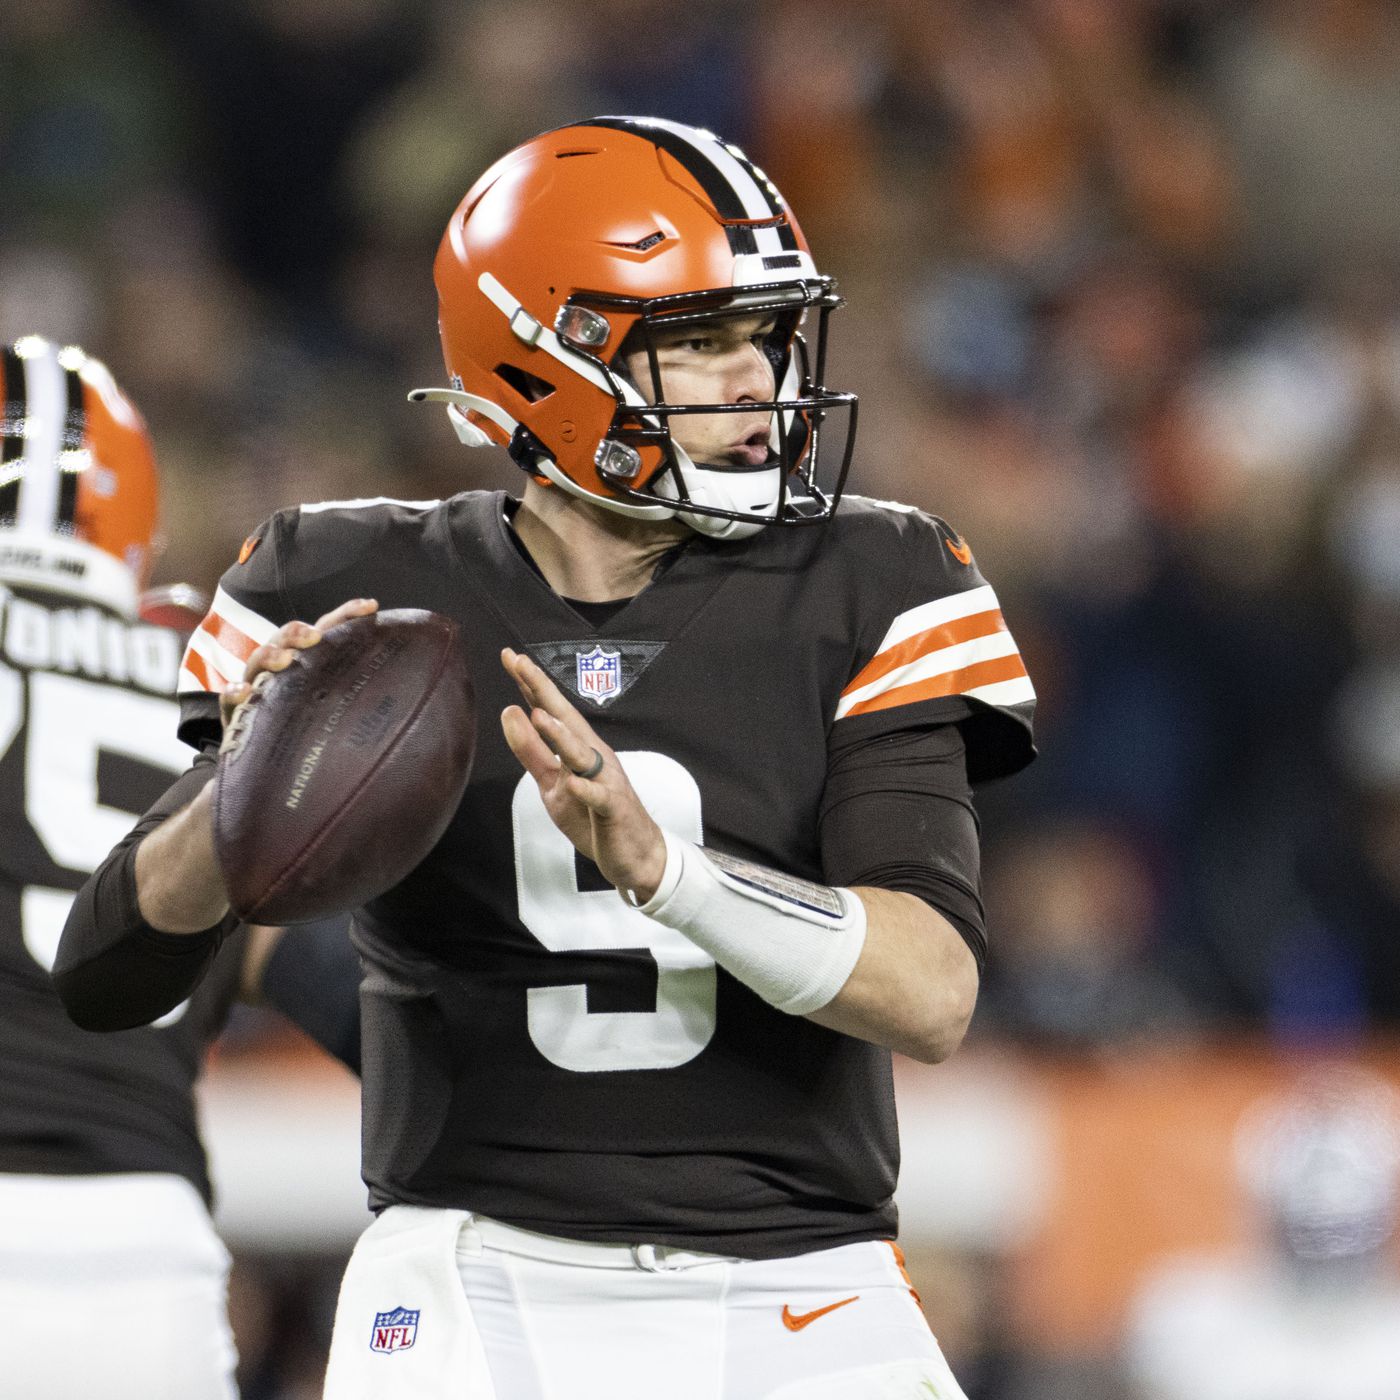 BREAKING NEWS, Free Agency Madness, Cleveland Browns